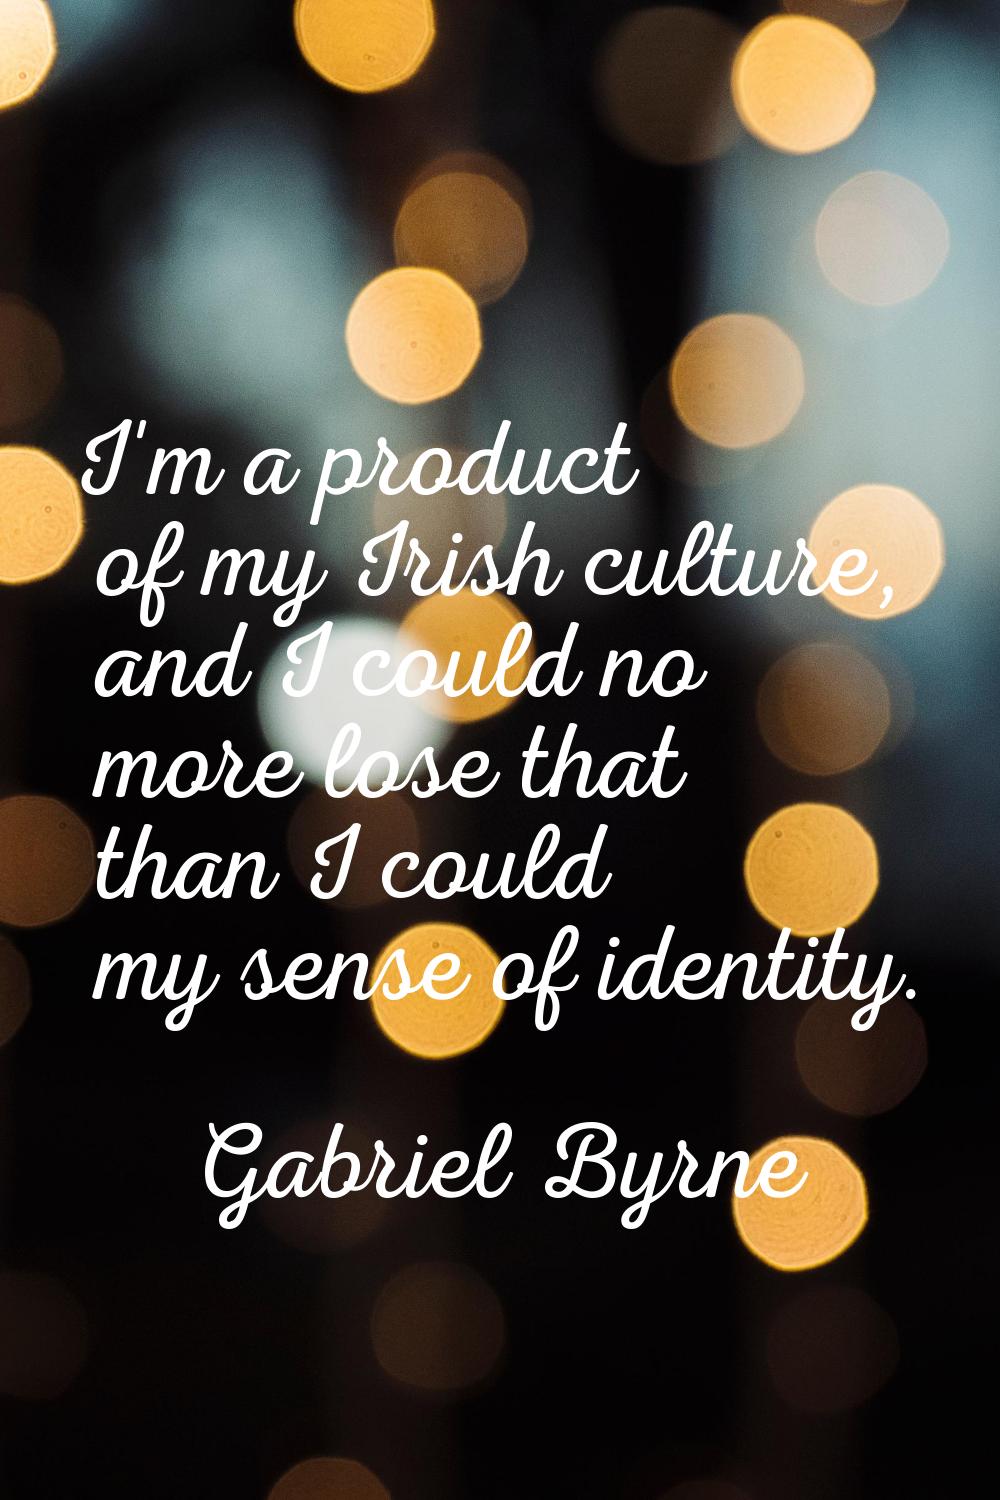 I'm a product of my Irish culture, and I could no more lose that than I could my sense of identity.